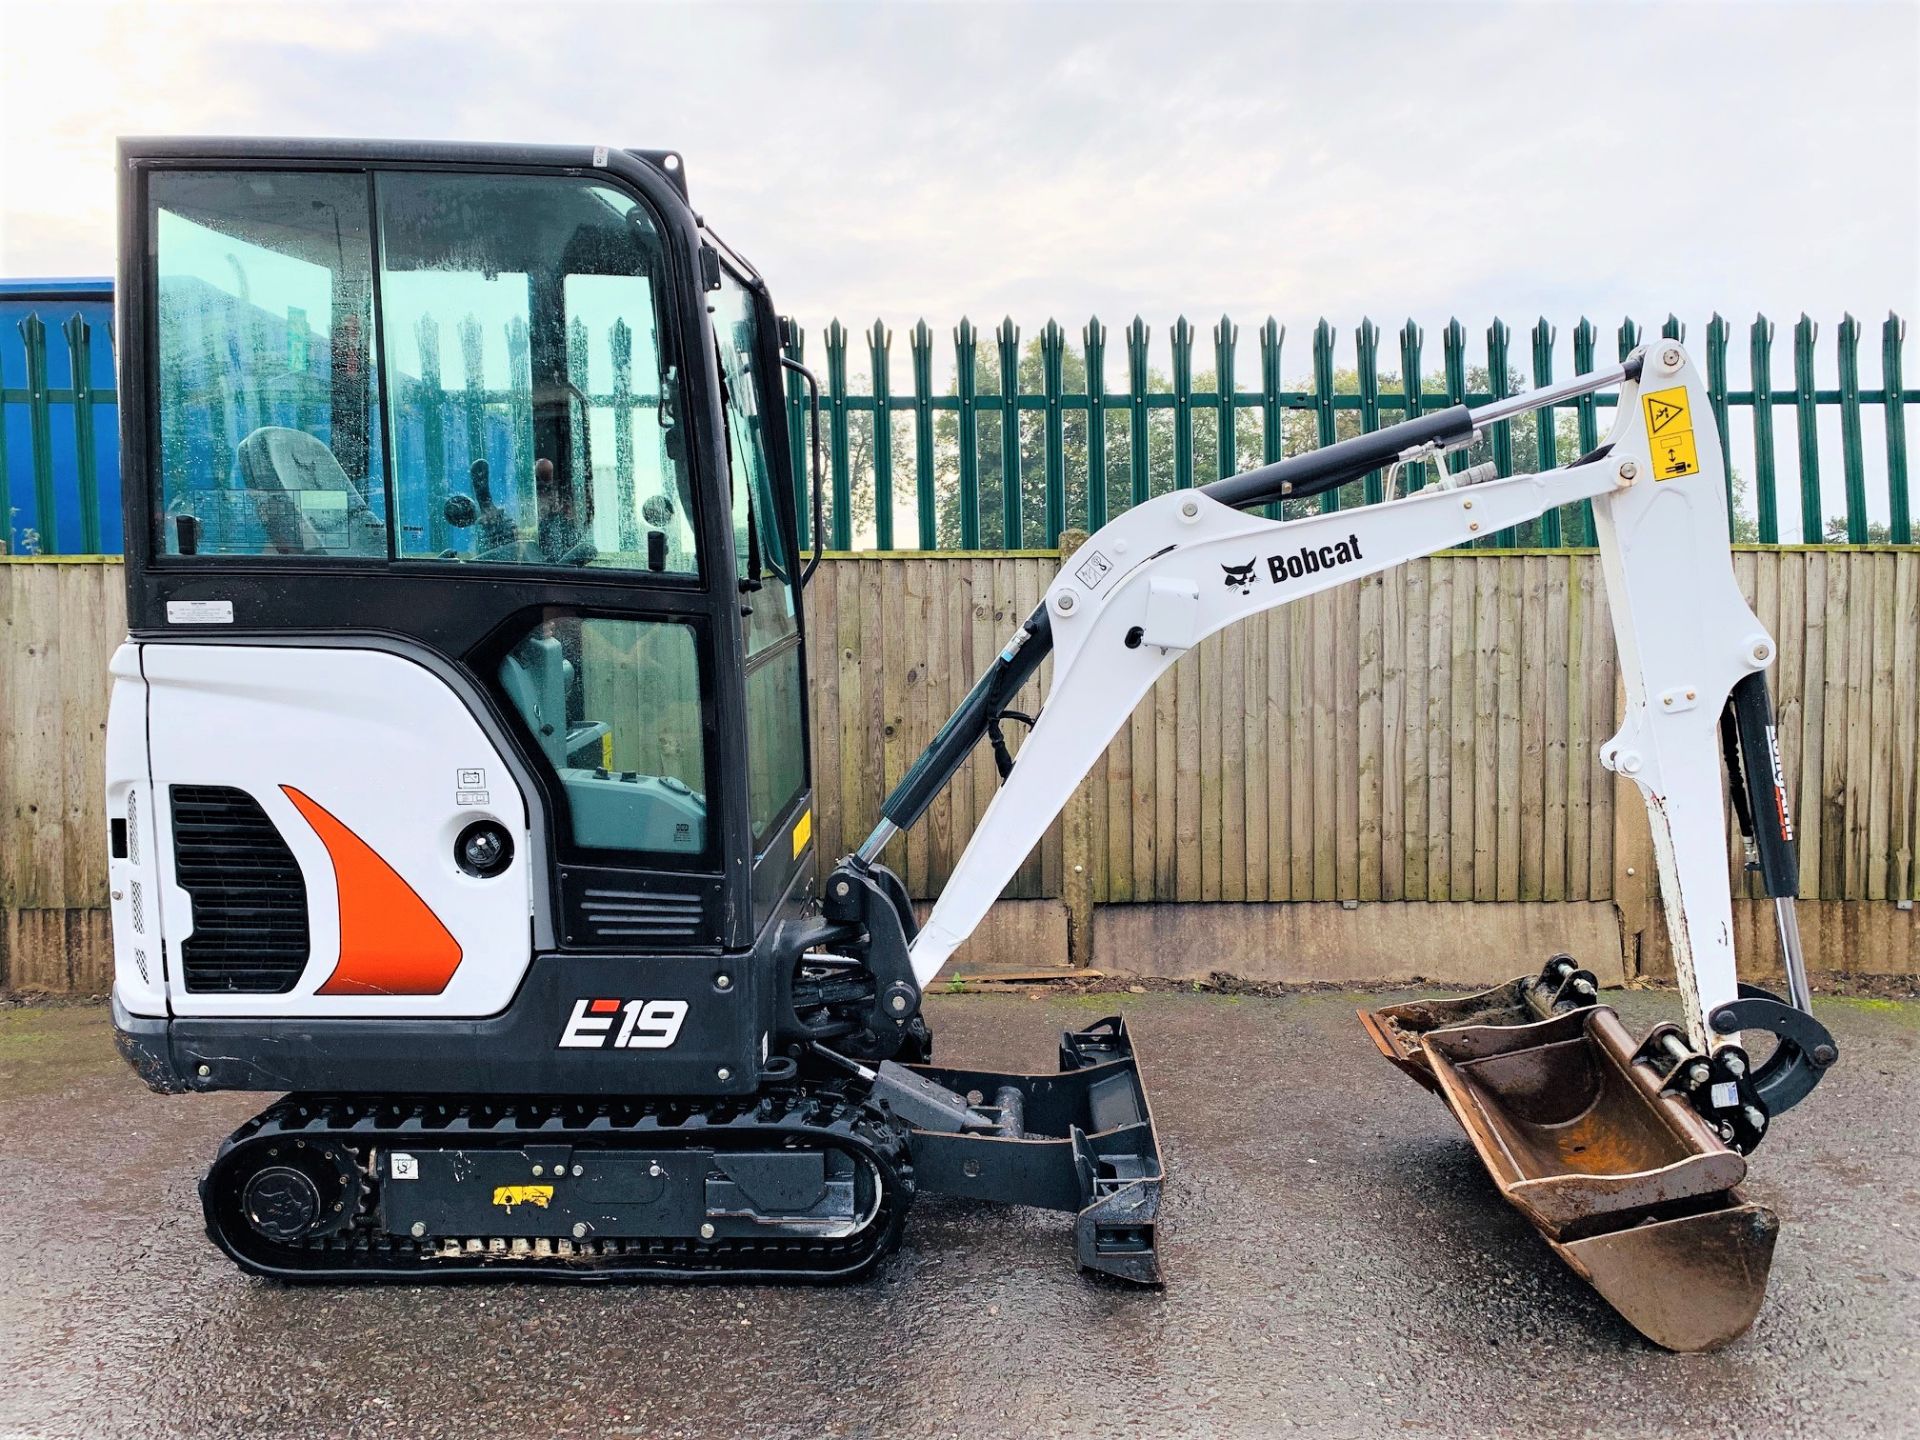 BOBCAT E19 RUBBER TRACKED CRAWLER DIGGER / EXCAVATOR, YEAR 2019, 3 X BUCKETS, 2 SPEED TRACKING - Image 6 of 10